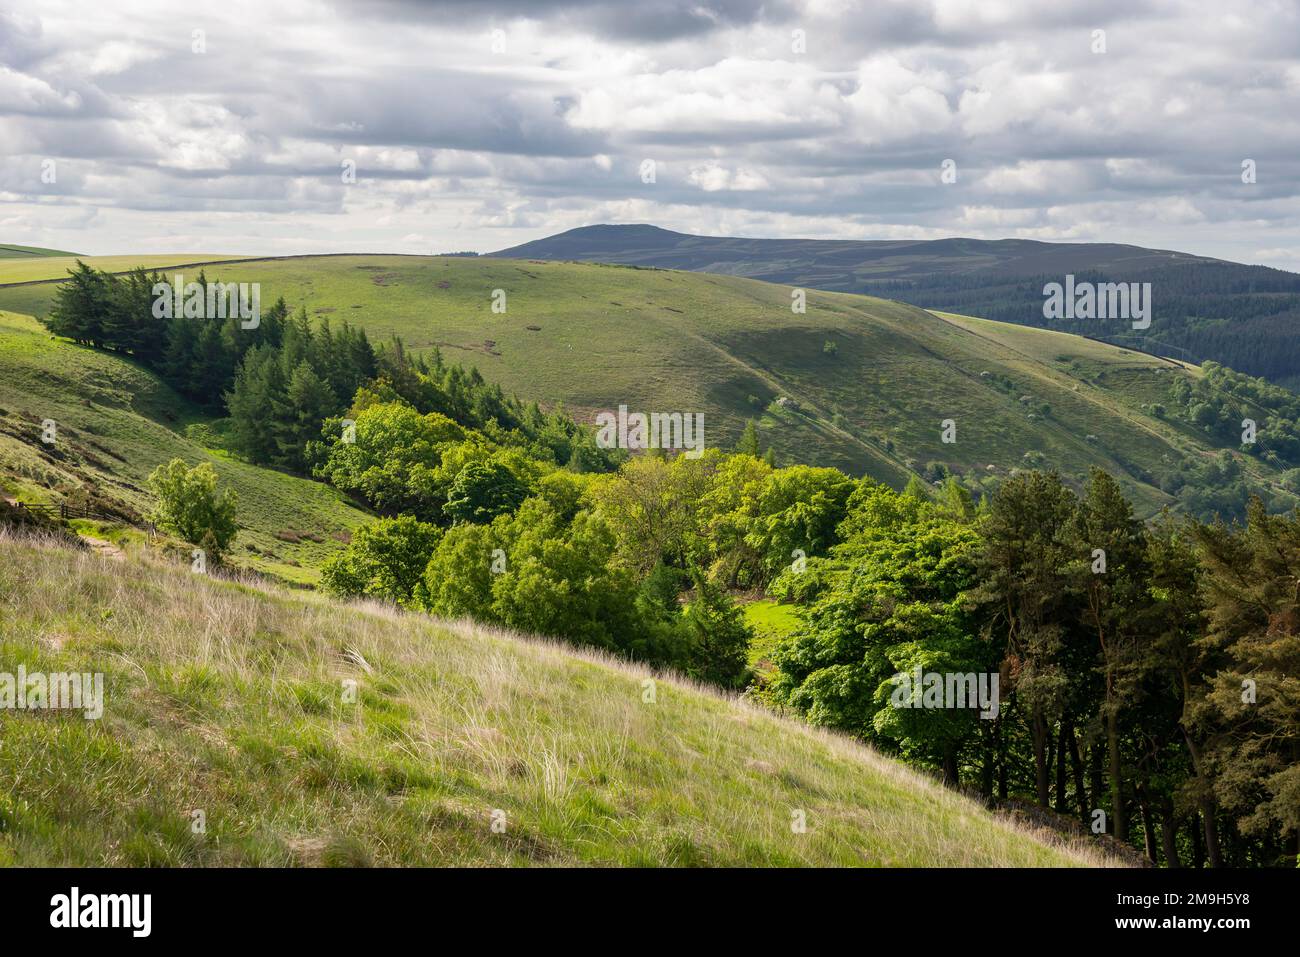 View from Rowlee Pasture above the Snake Pass with Win Hill in the distance. Peak District national par, Derbyshire, England. Stock Photo